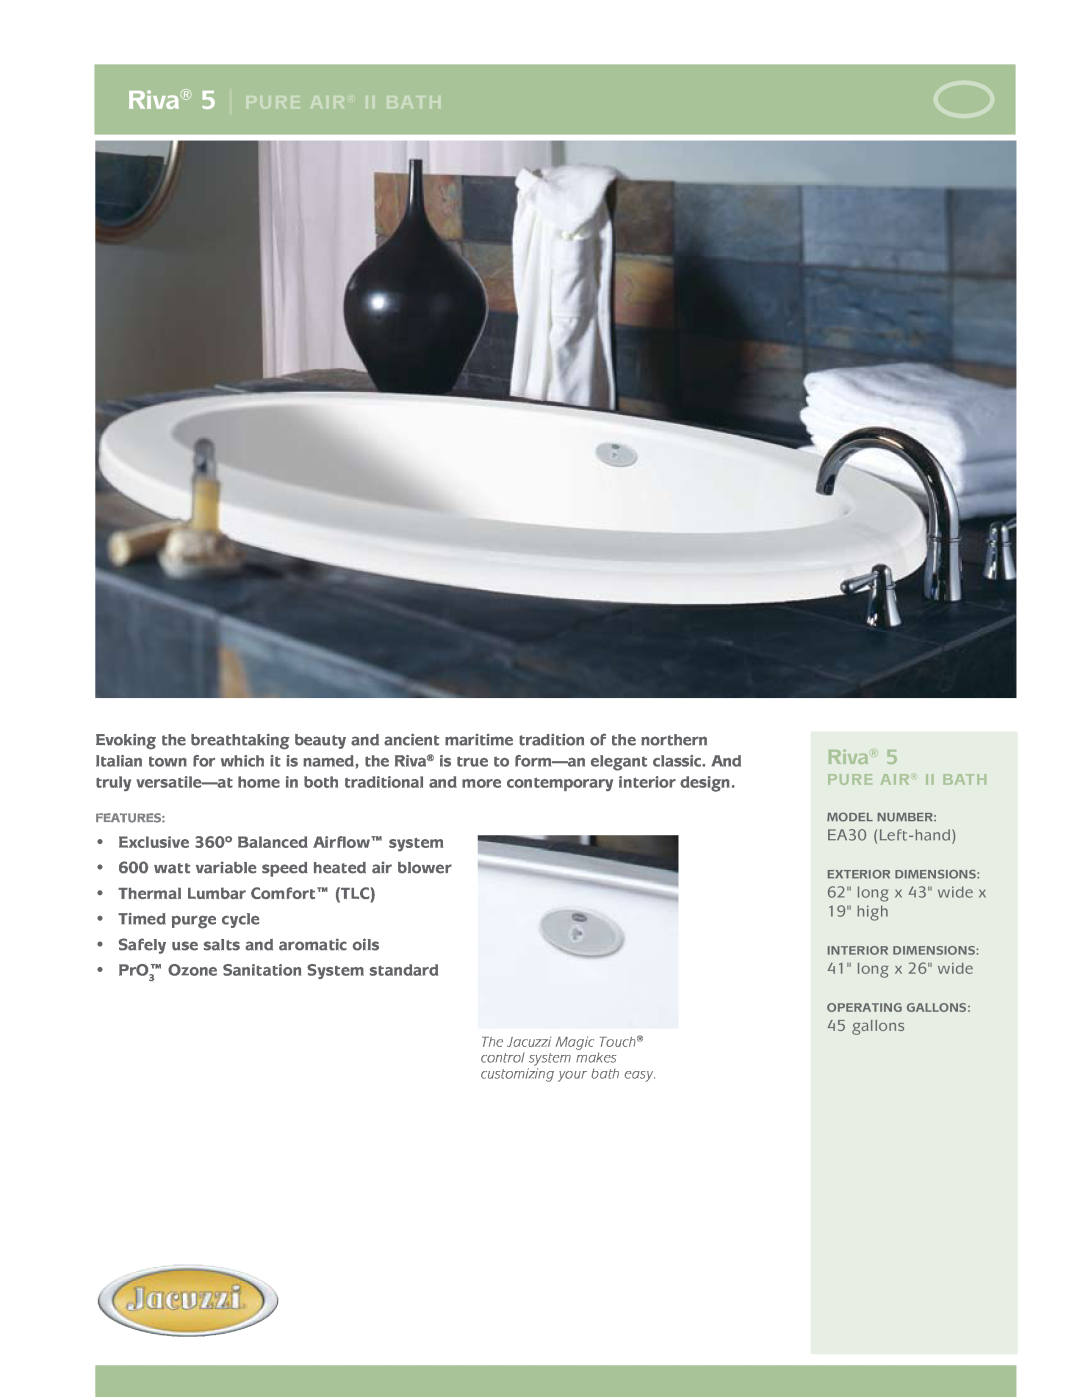 Jacuzzi dimensions EA30 Left-hand, long x 43 wide x 19 high, long x 26 wide, gallons, Riva 5 pure air ii Bath 